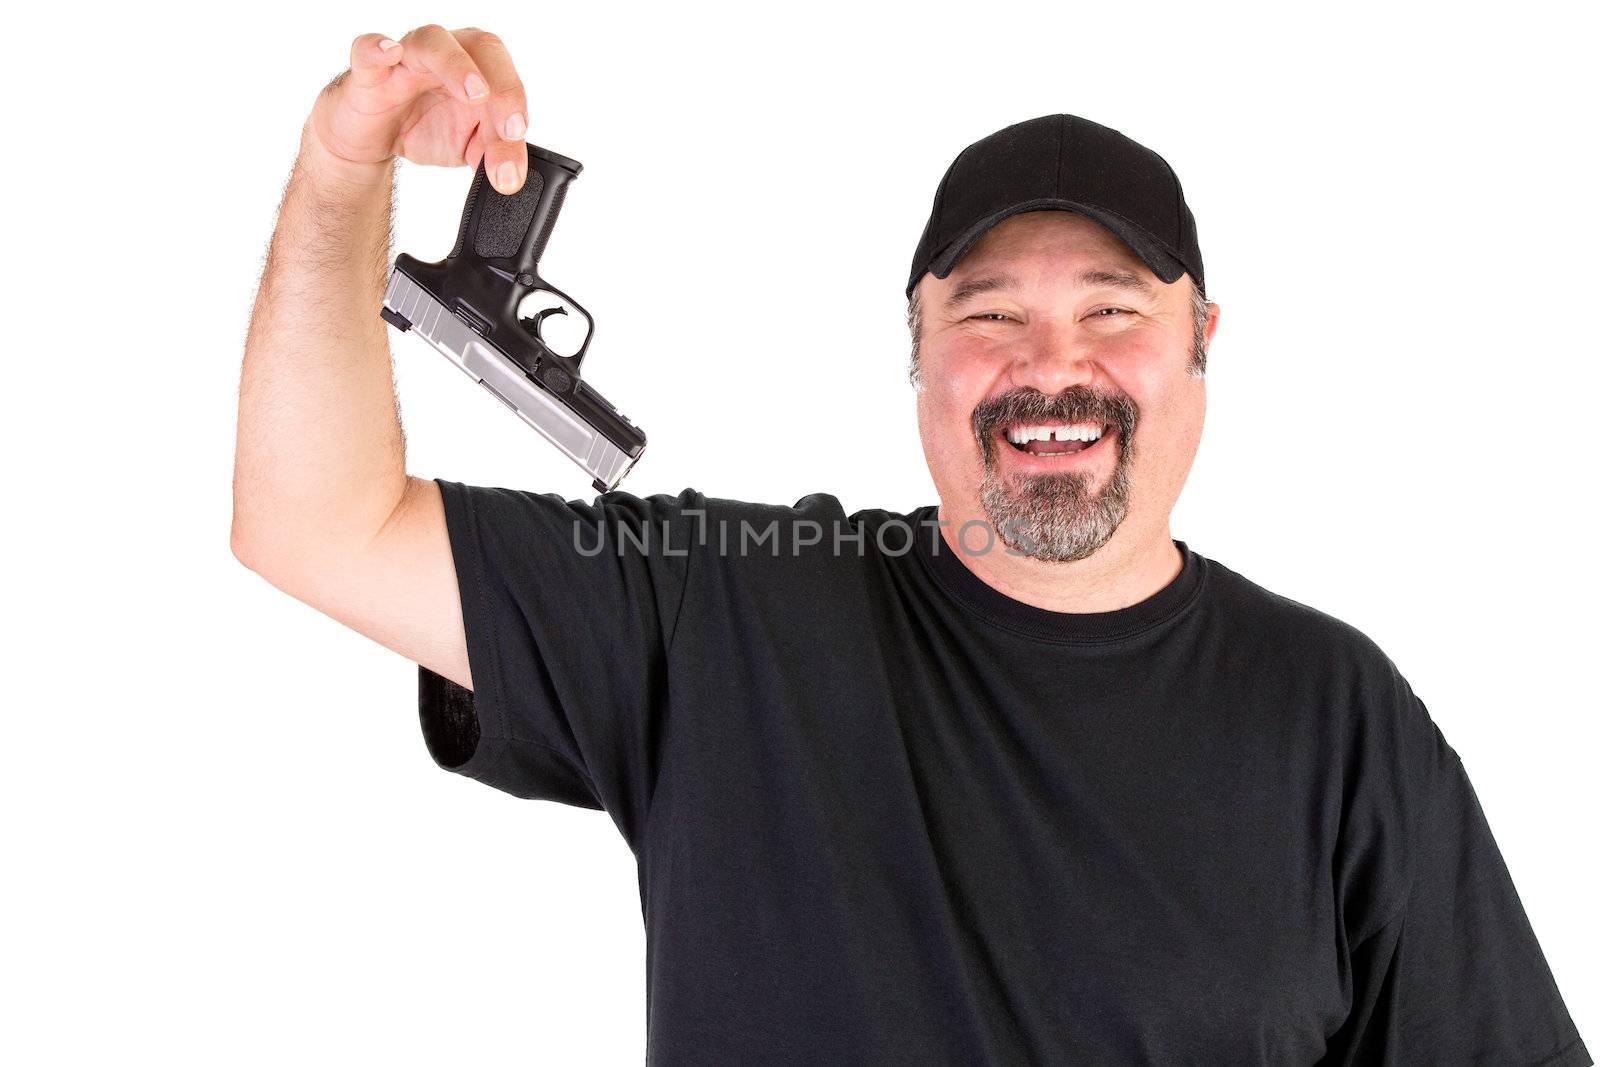 Big guy with a goatee and black shirt surrender with his gun on his left hand smiling friendly